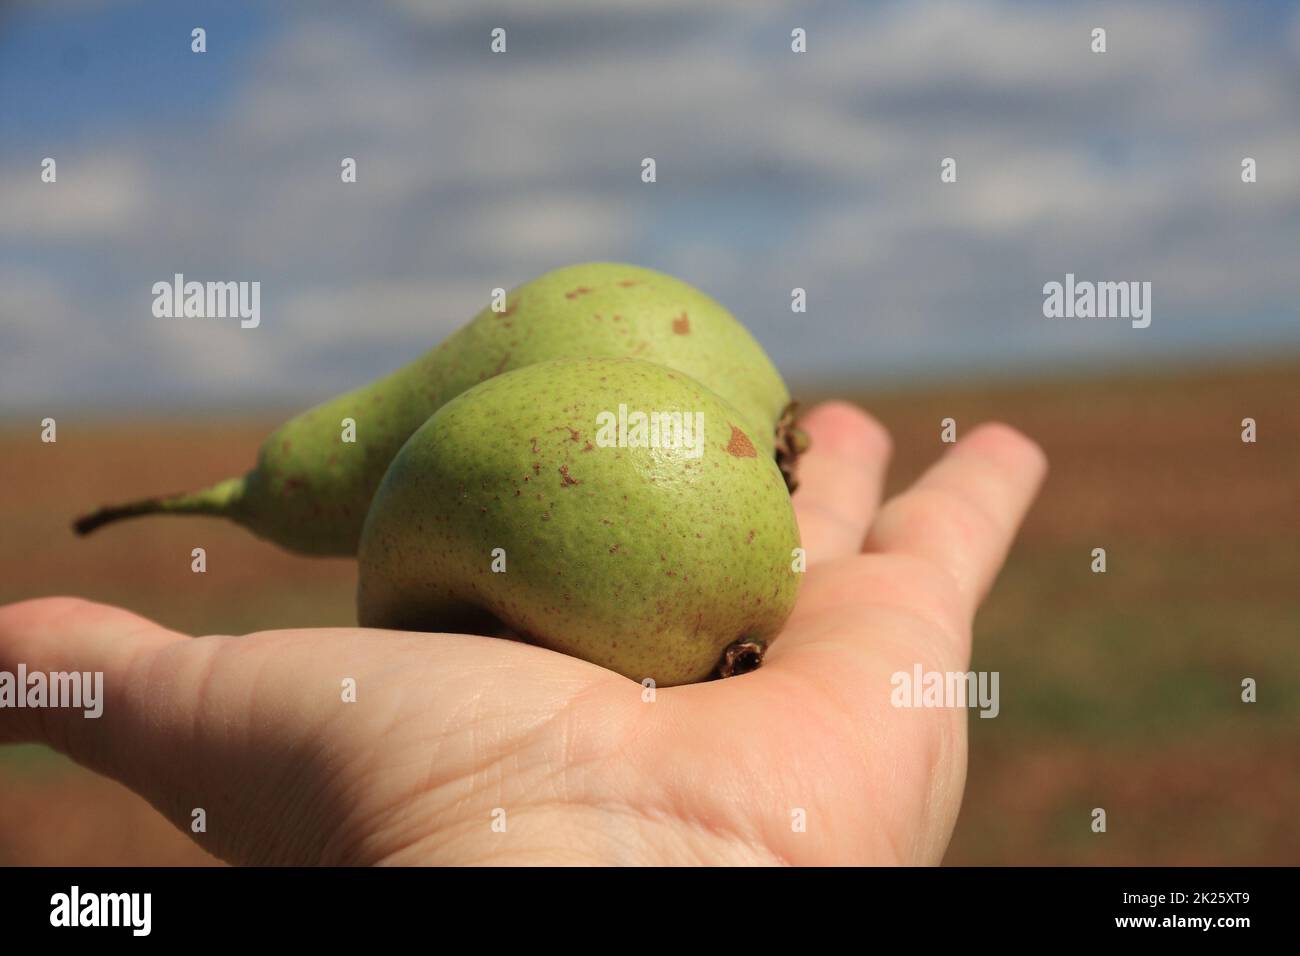 Two pears on hand Stock Photo